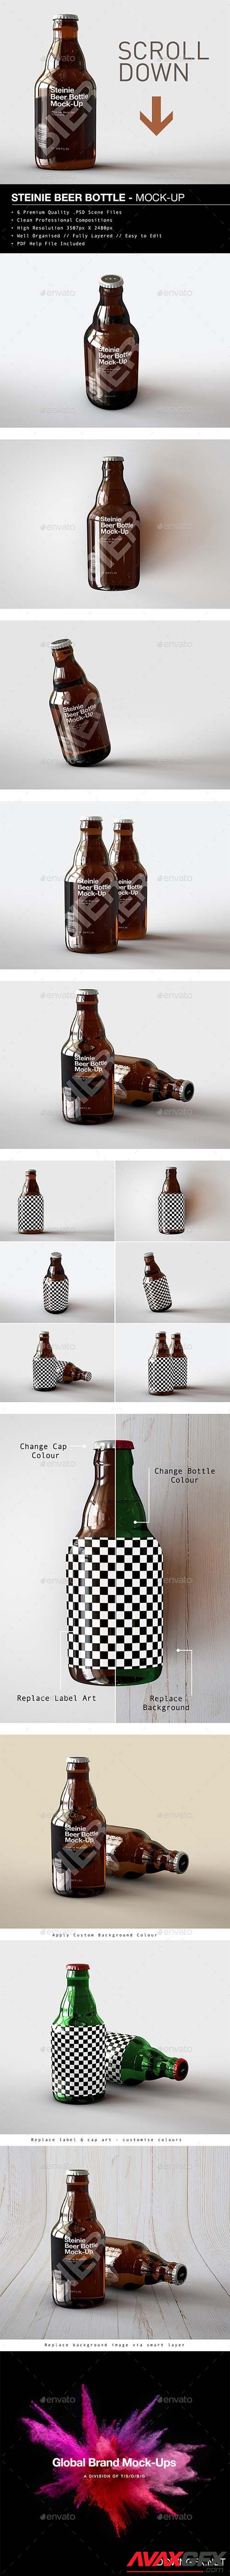 Graphicriver - Beer Bottle Mock-Up | Steinie Edition 21402018